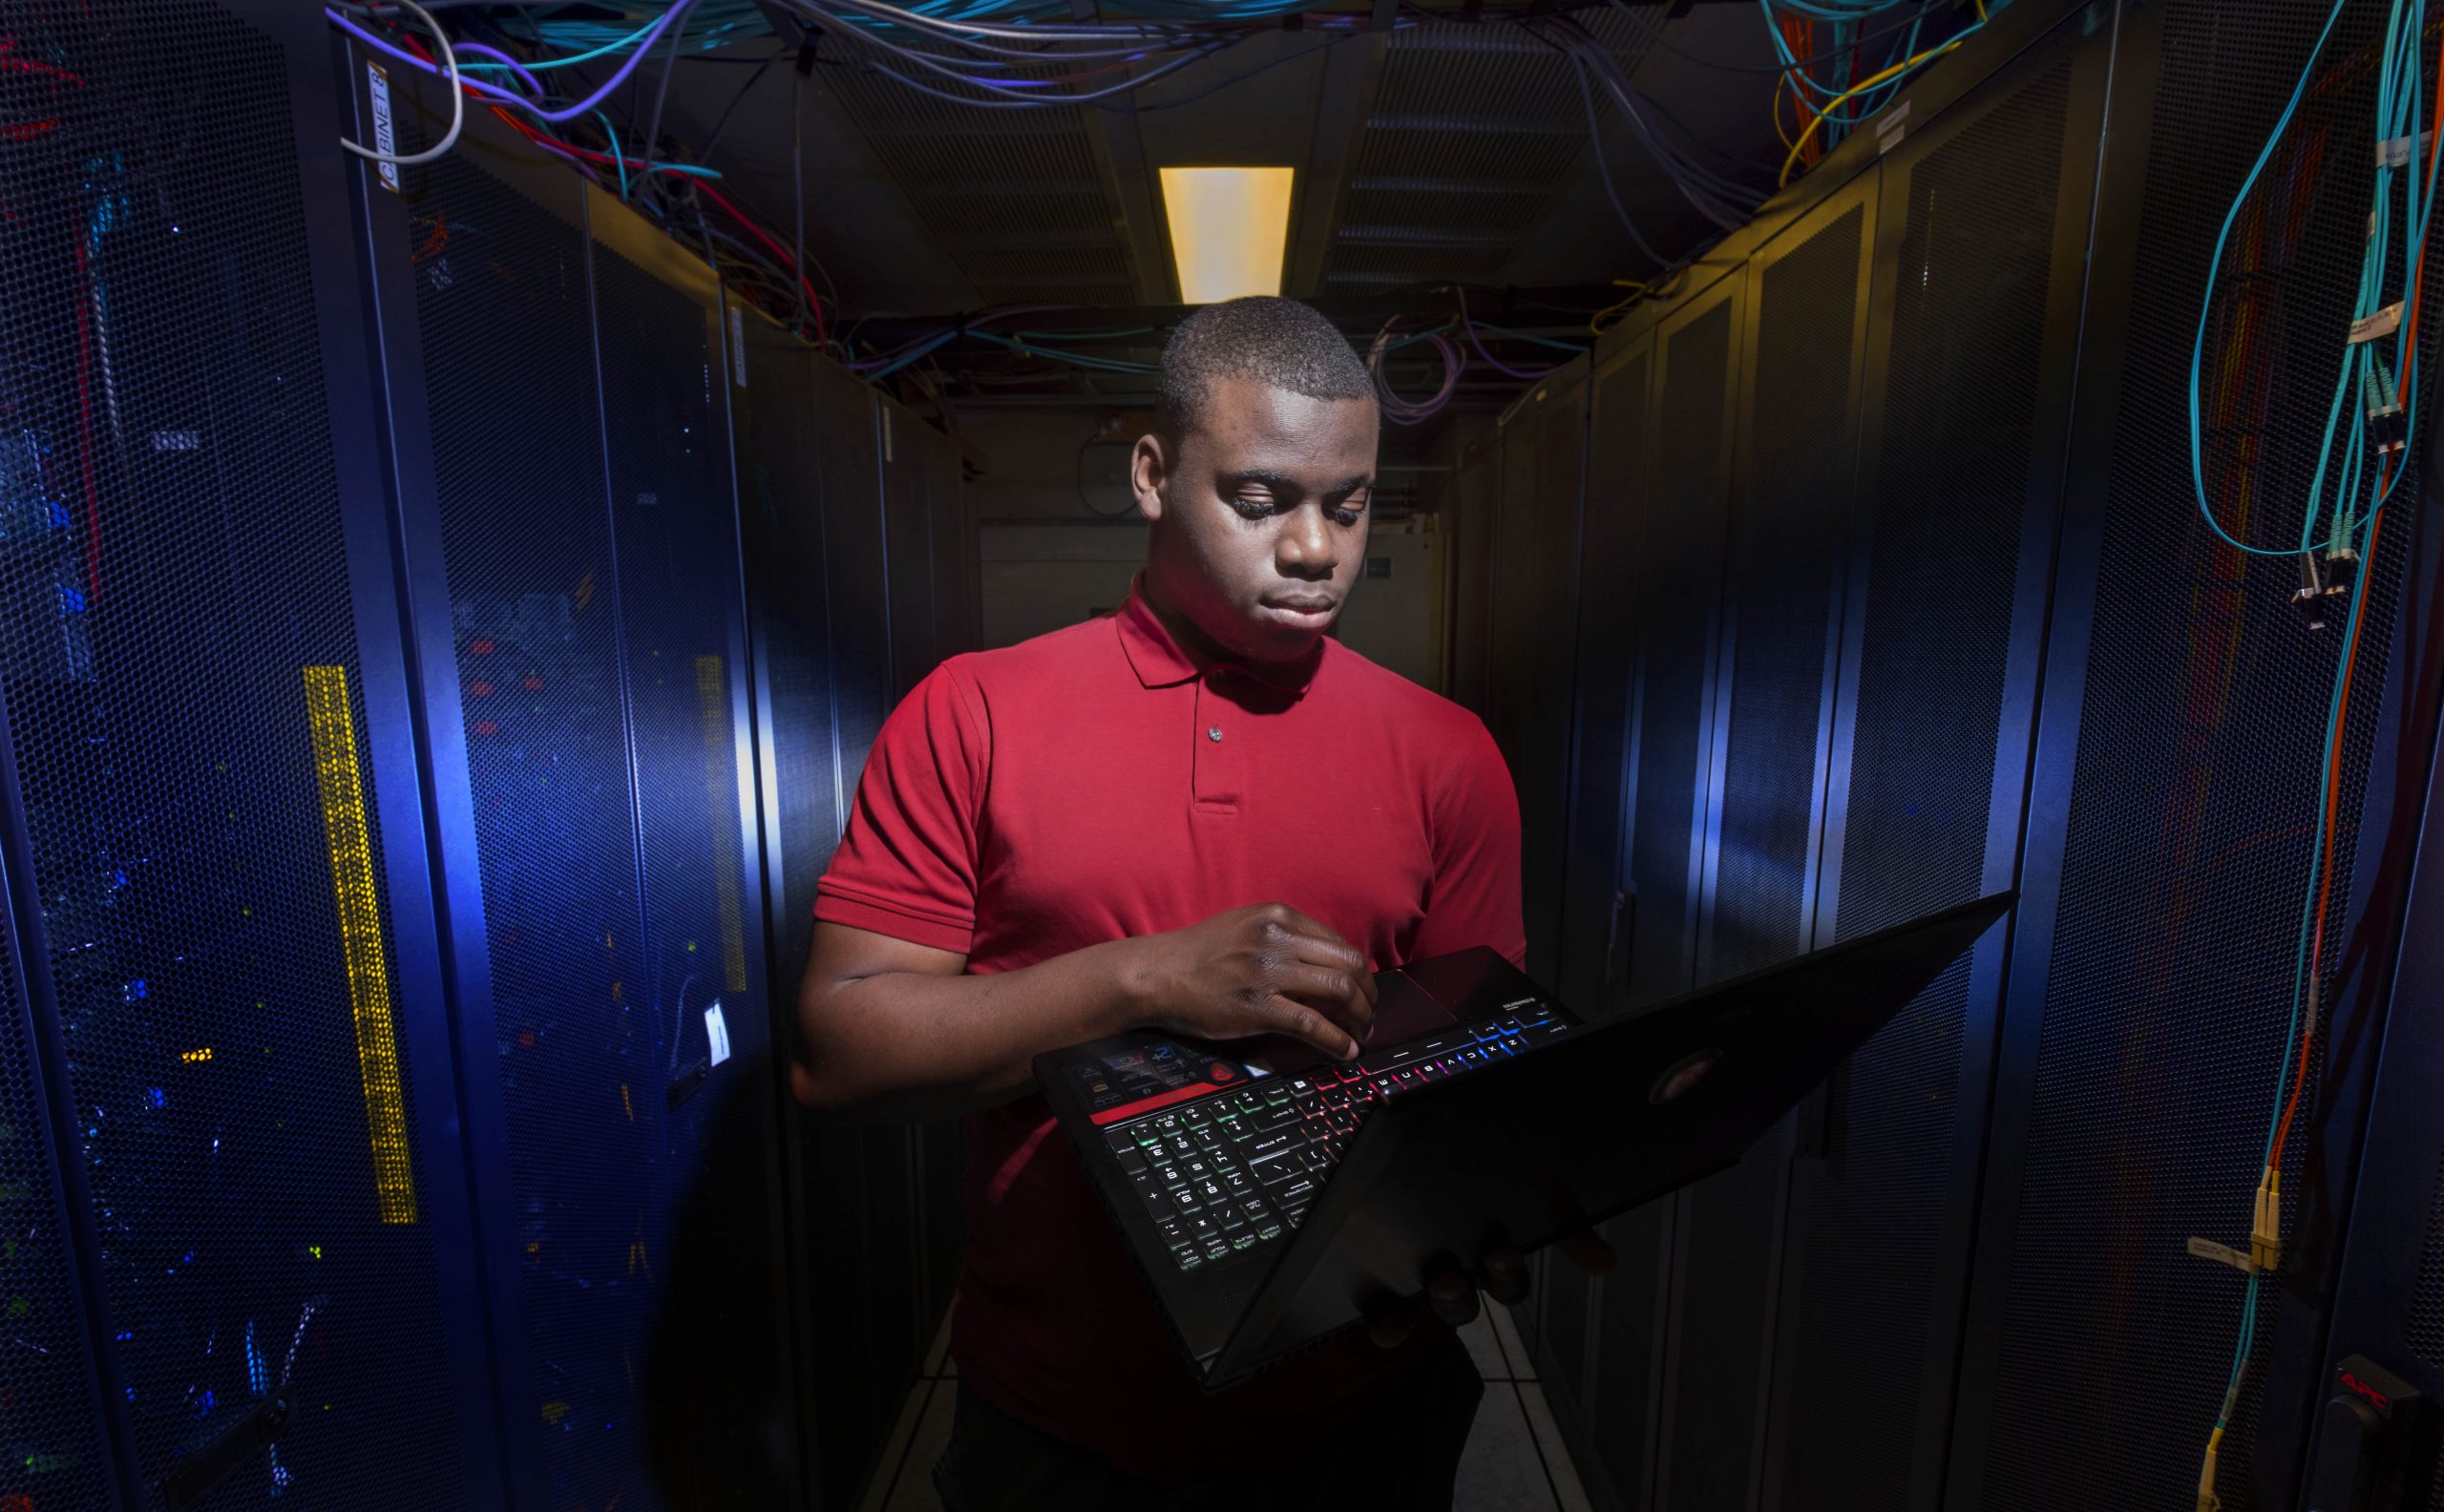 Tolu in data centre on campus with computer